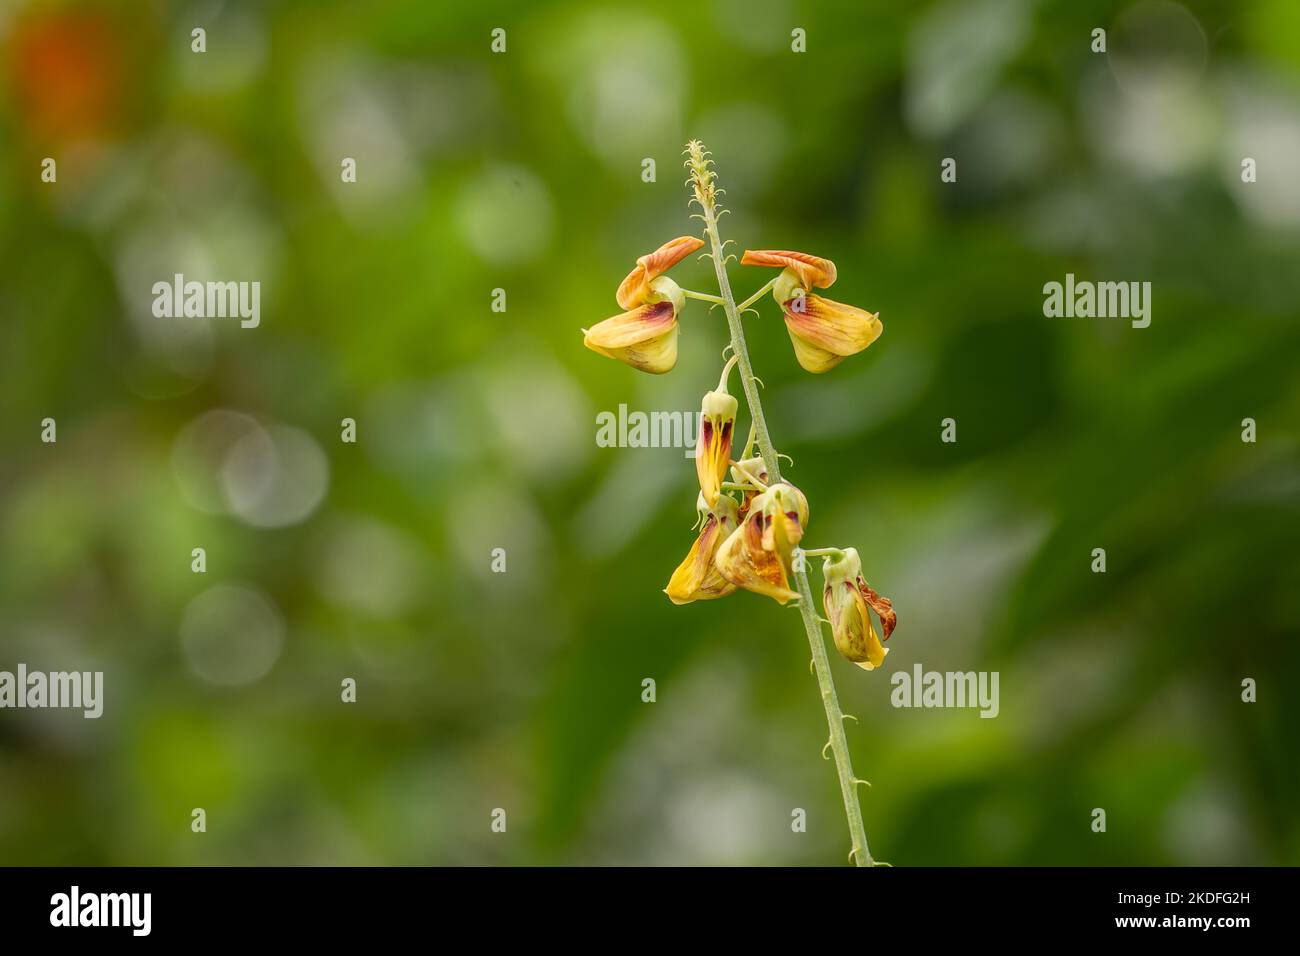 A yellow flower of Crotalaria trichotoma Bojer pops up among the grass, has a blurry green grass background Stock Photo